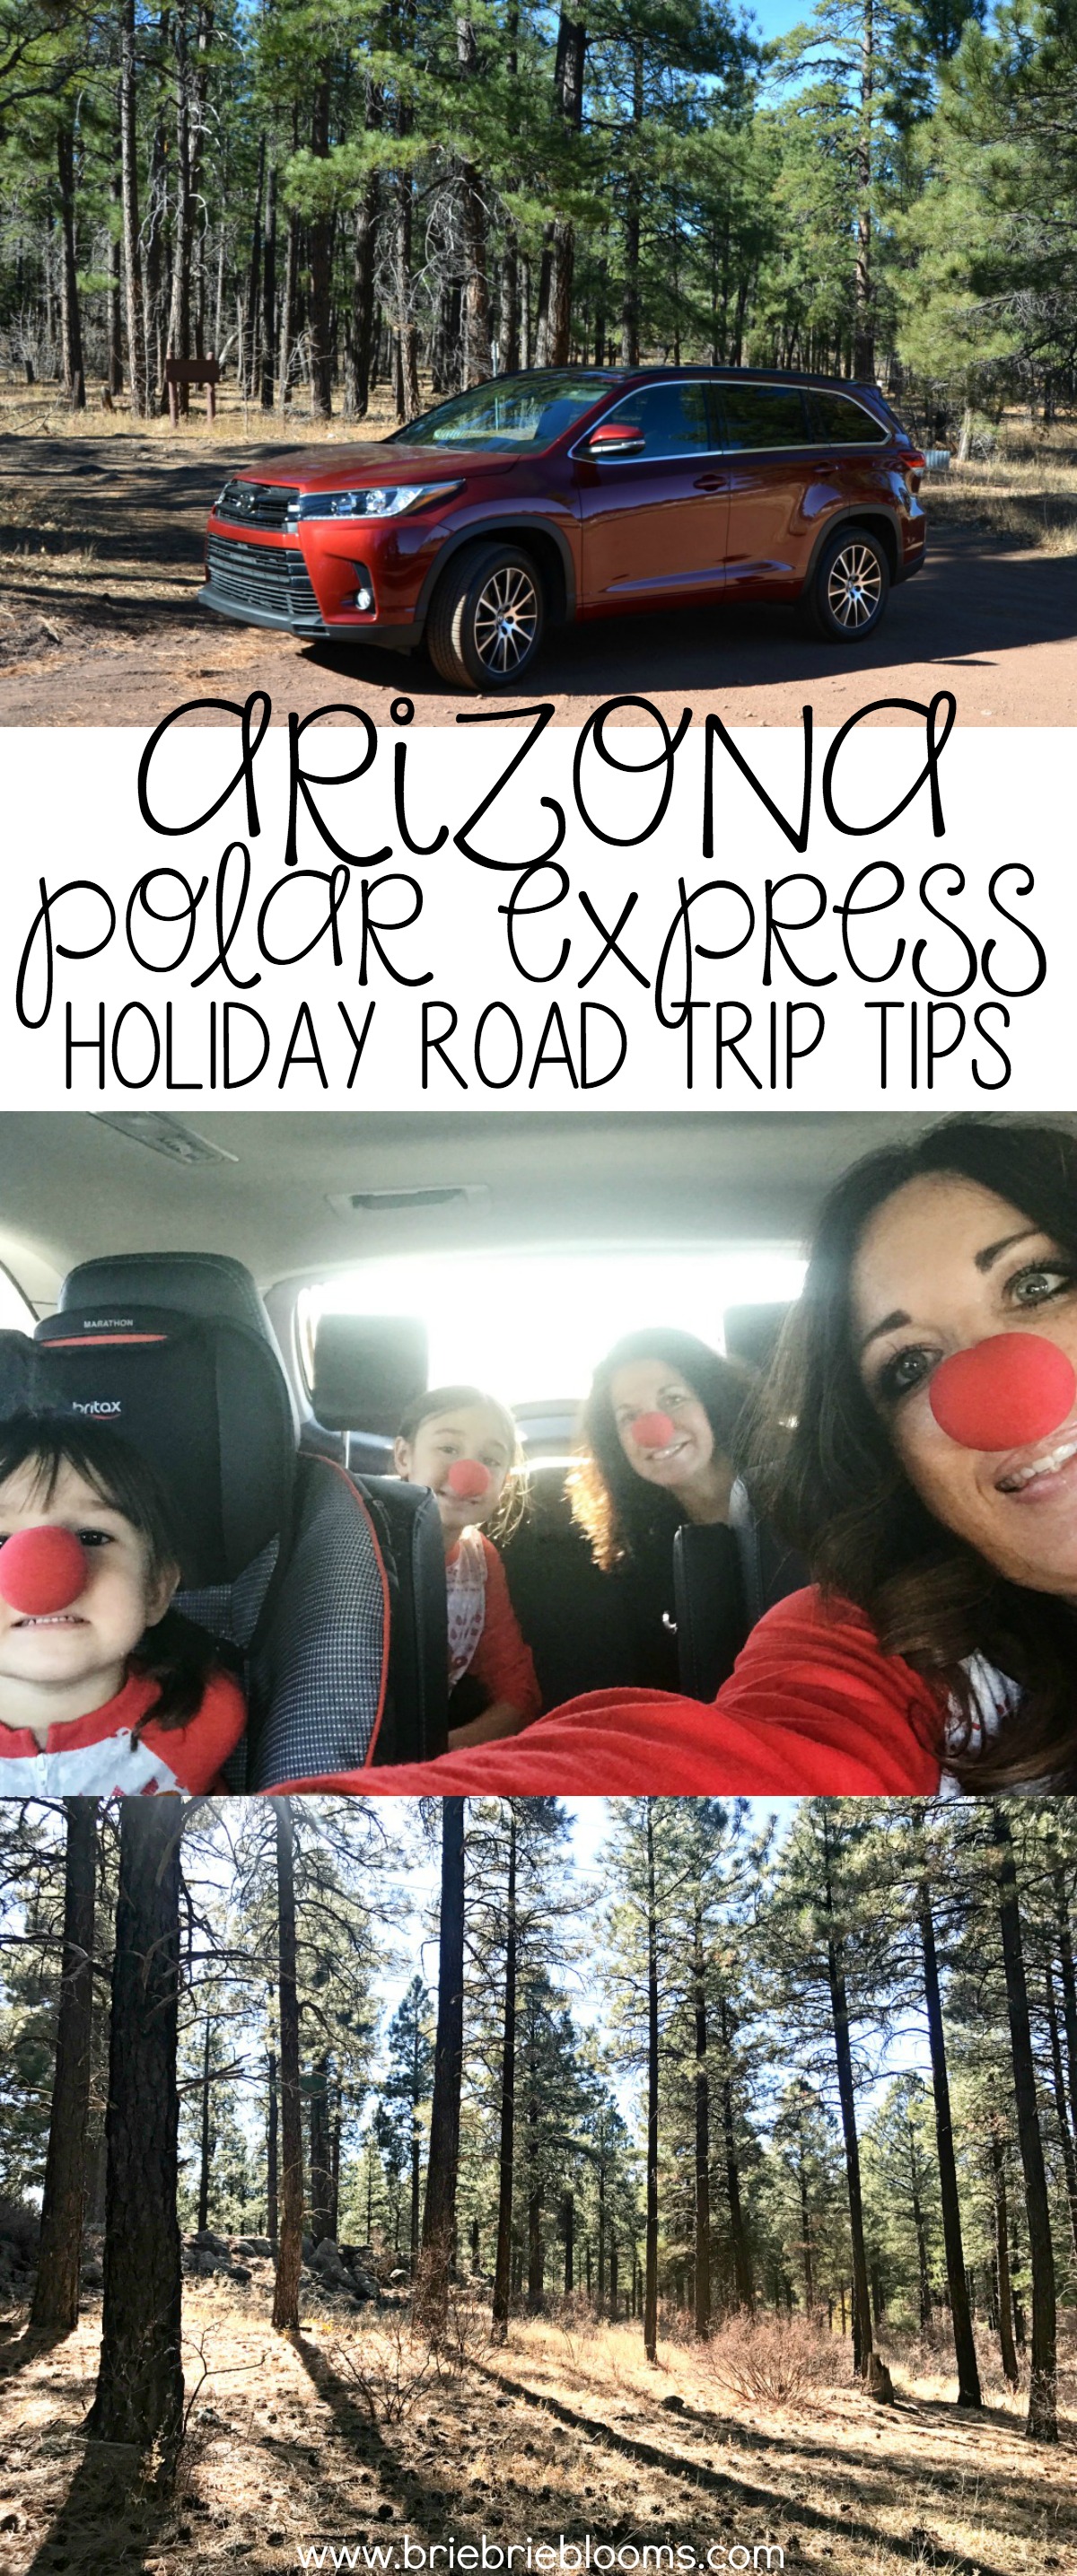 Our Arizona Polar Express Holiday Road Trip Tips include driving in a comfortable vehicle well equipped for winter weather, matching pajamas and more!